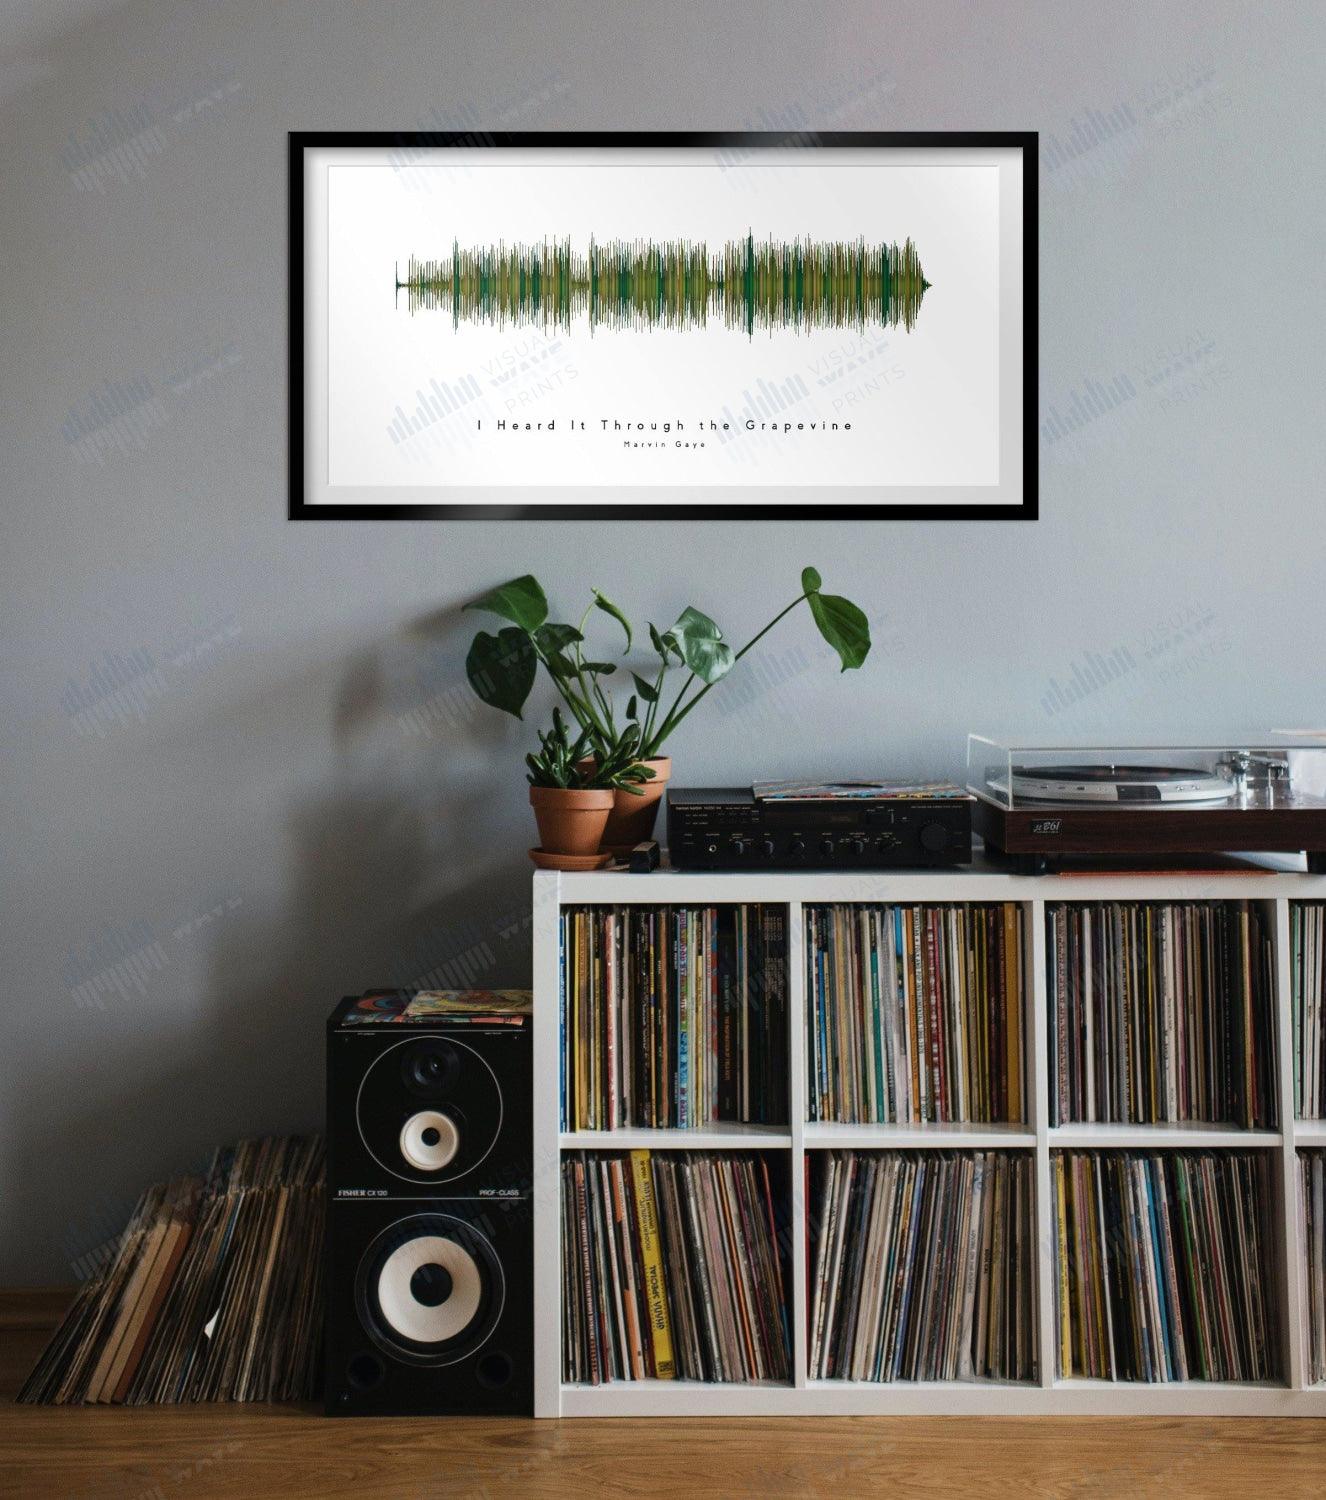 I Heard It Through the Grapevine by Marvin Gaye - Visual Wave Prints